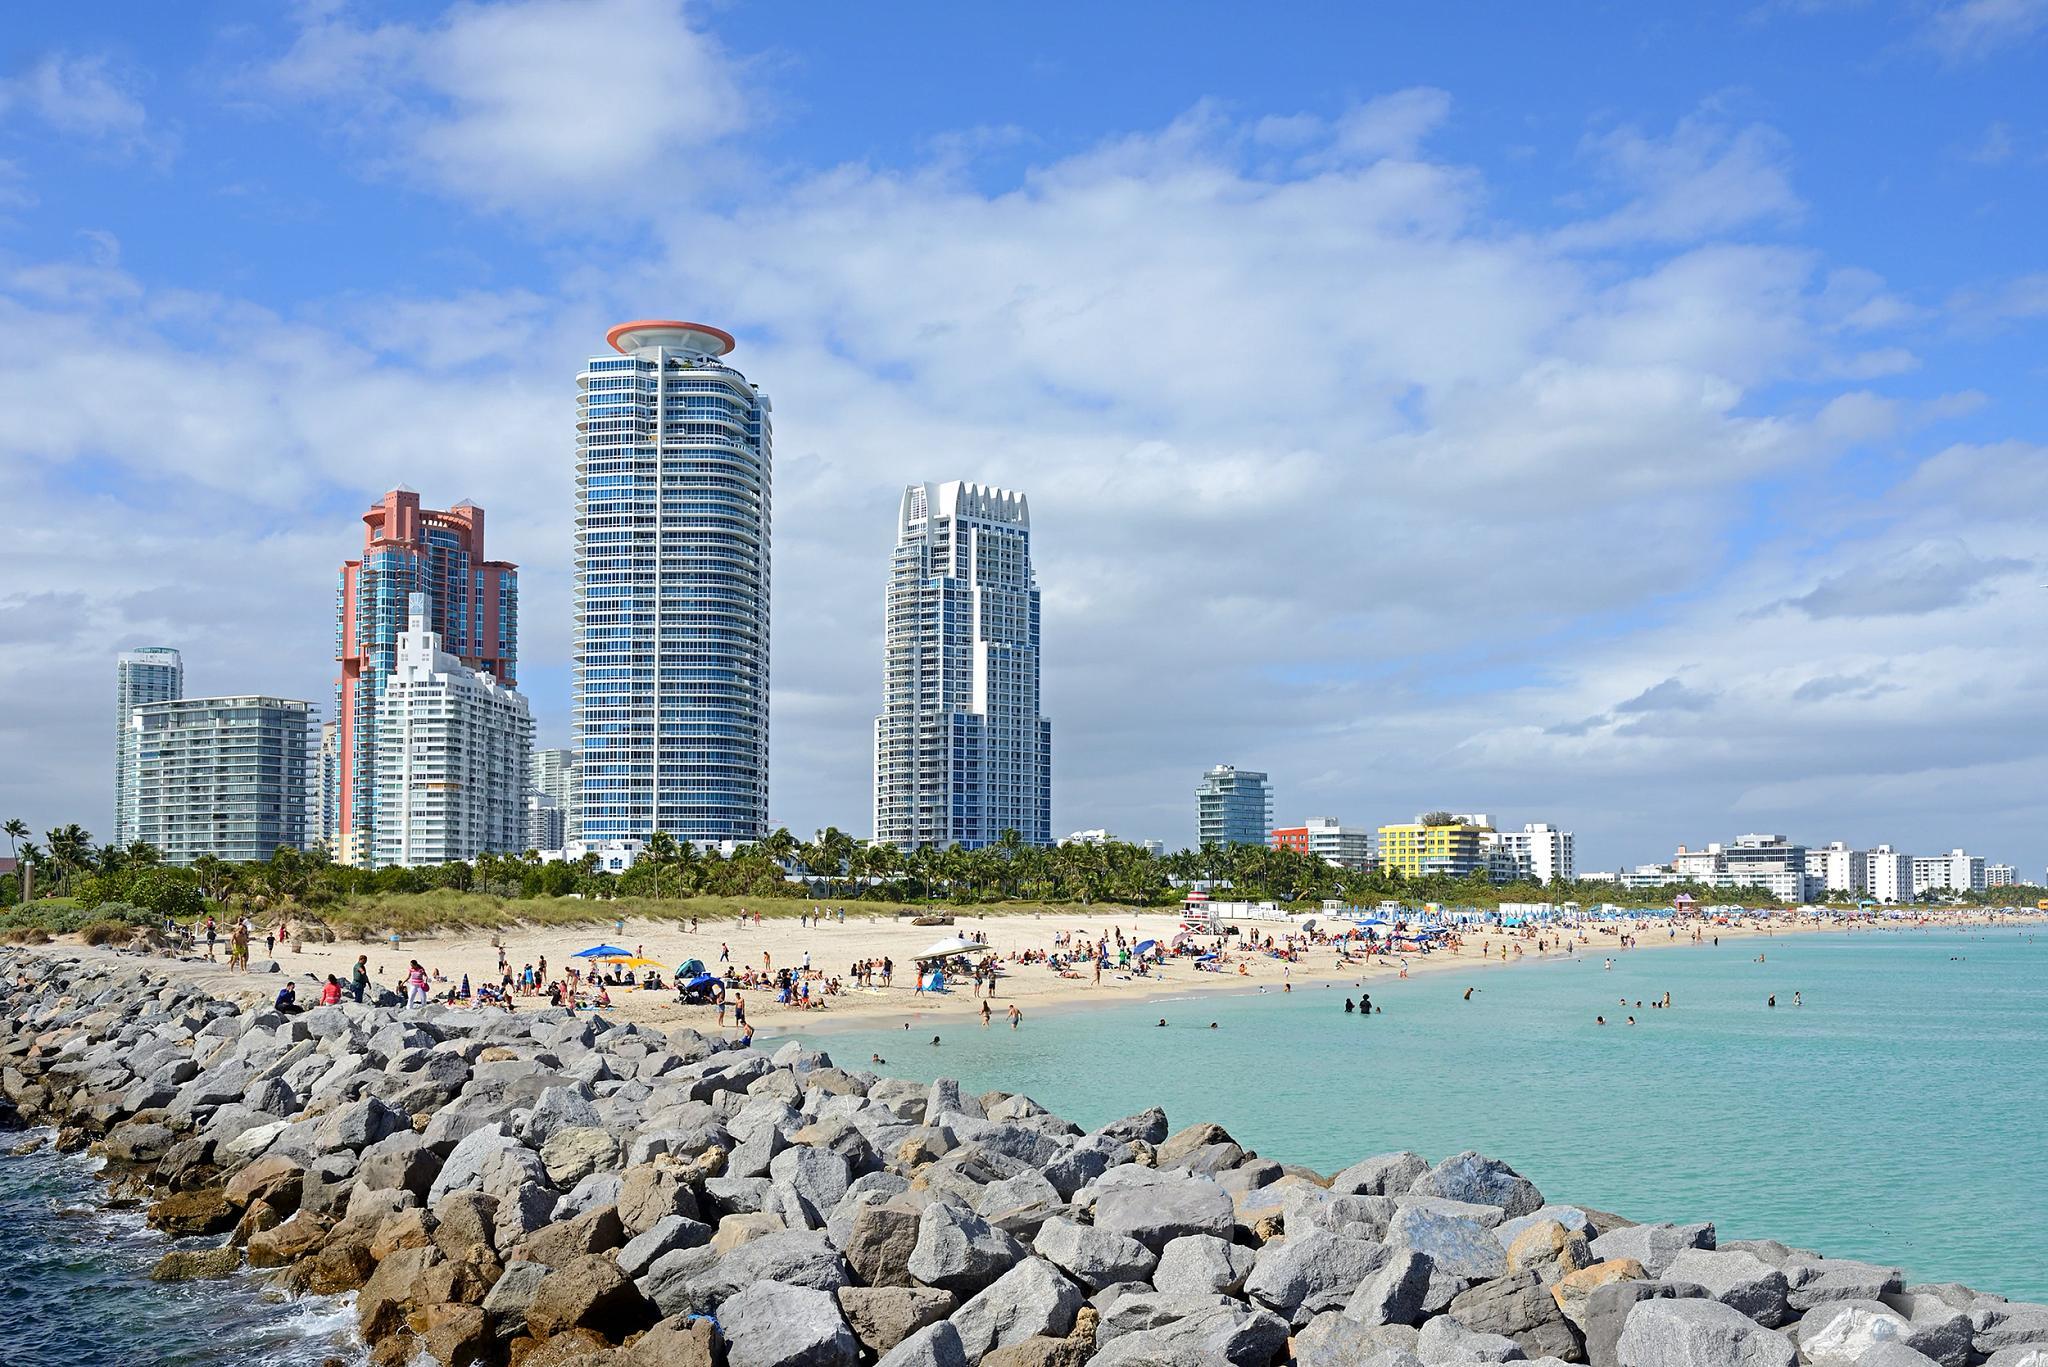 Travel to and hotel bookings in destination markets such as Miami are expected to decrease this summer compared to past years, when international travel was more limited by the pandemic. (Getty Images)